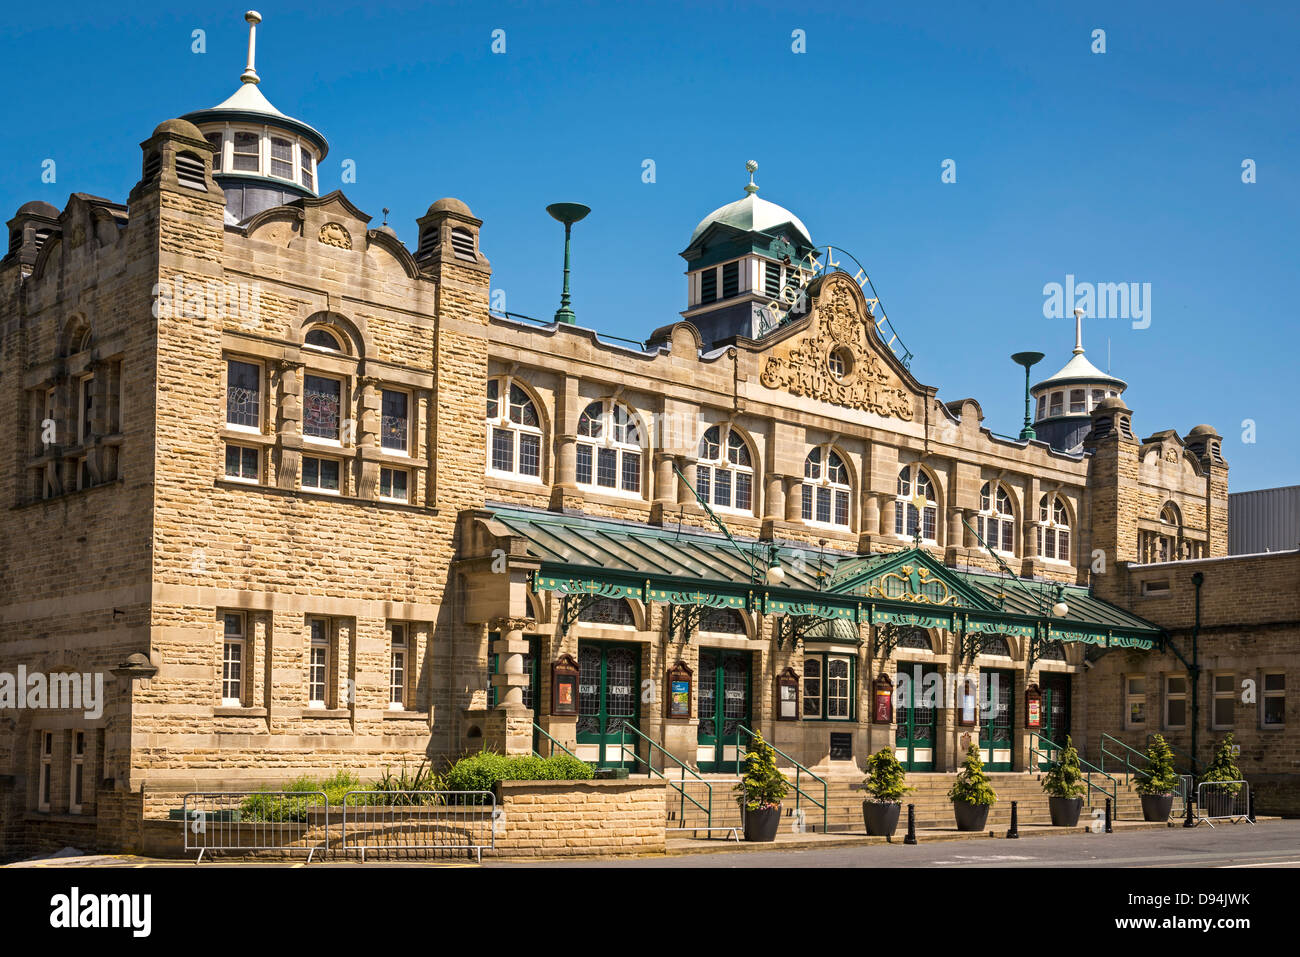 Harrogate's Royal Hall, an Edwardian Theatre built in 1903, is a venue for events, arts and entertainment. Stock Photo